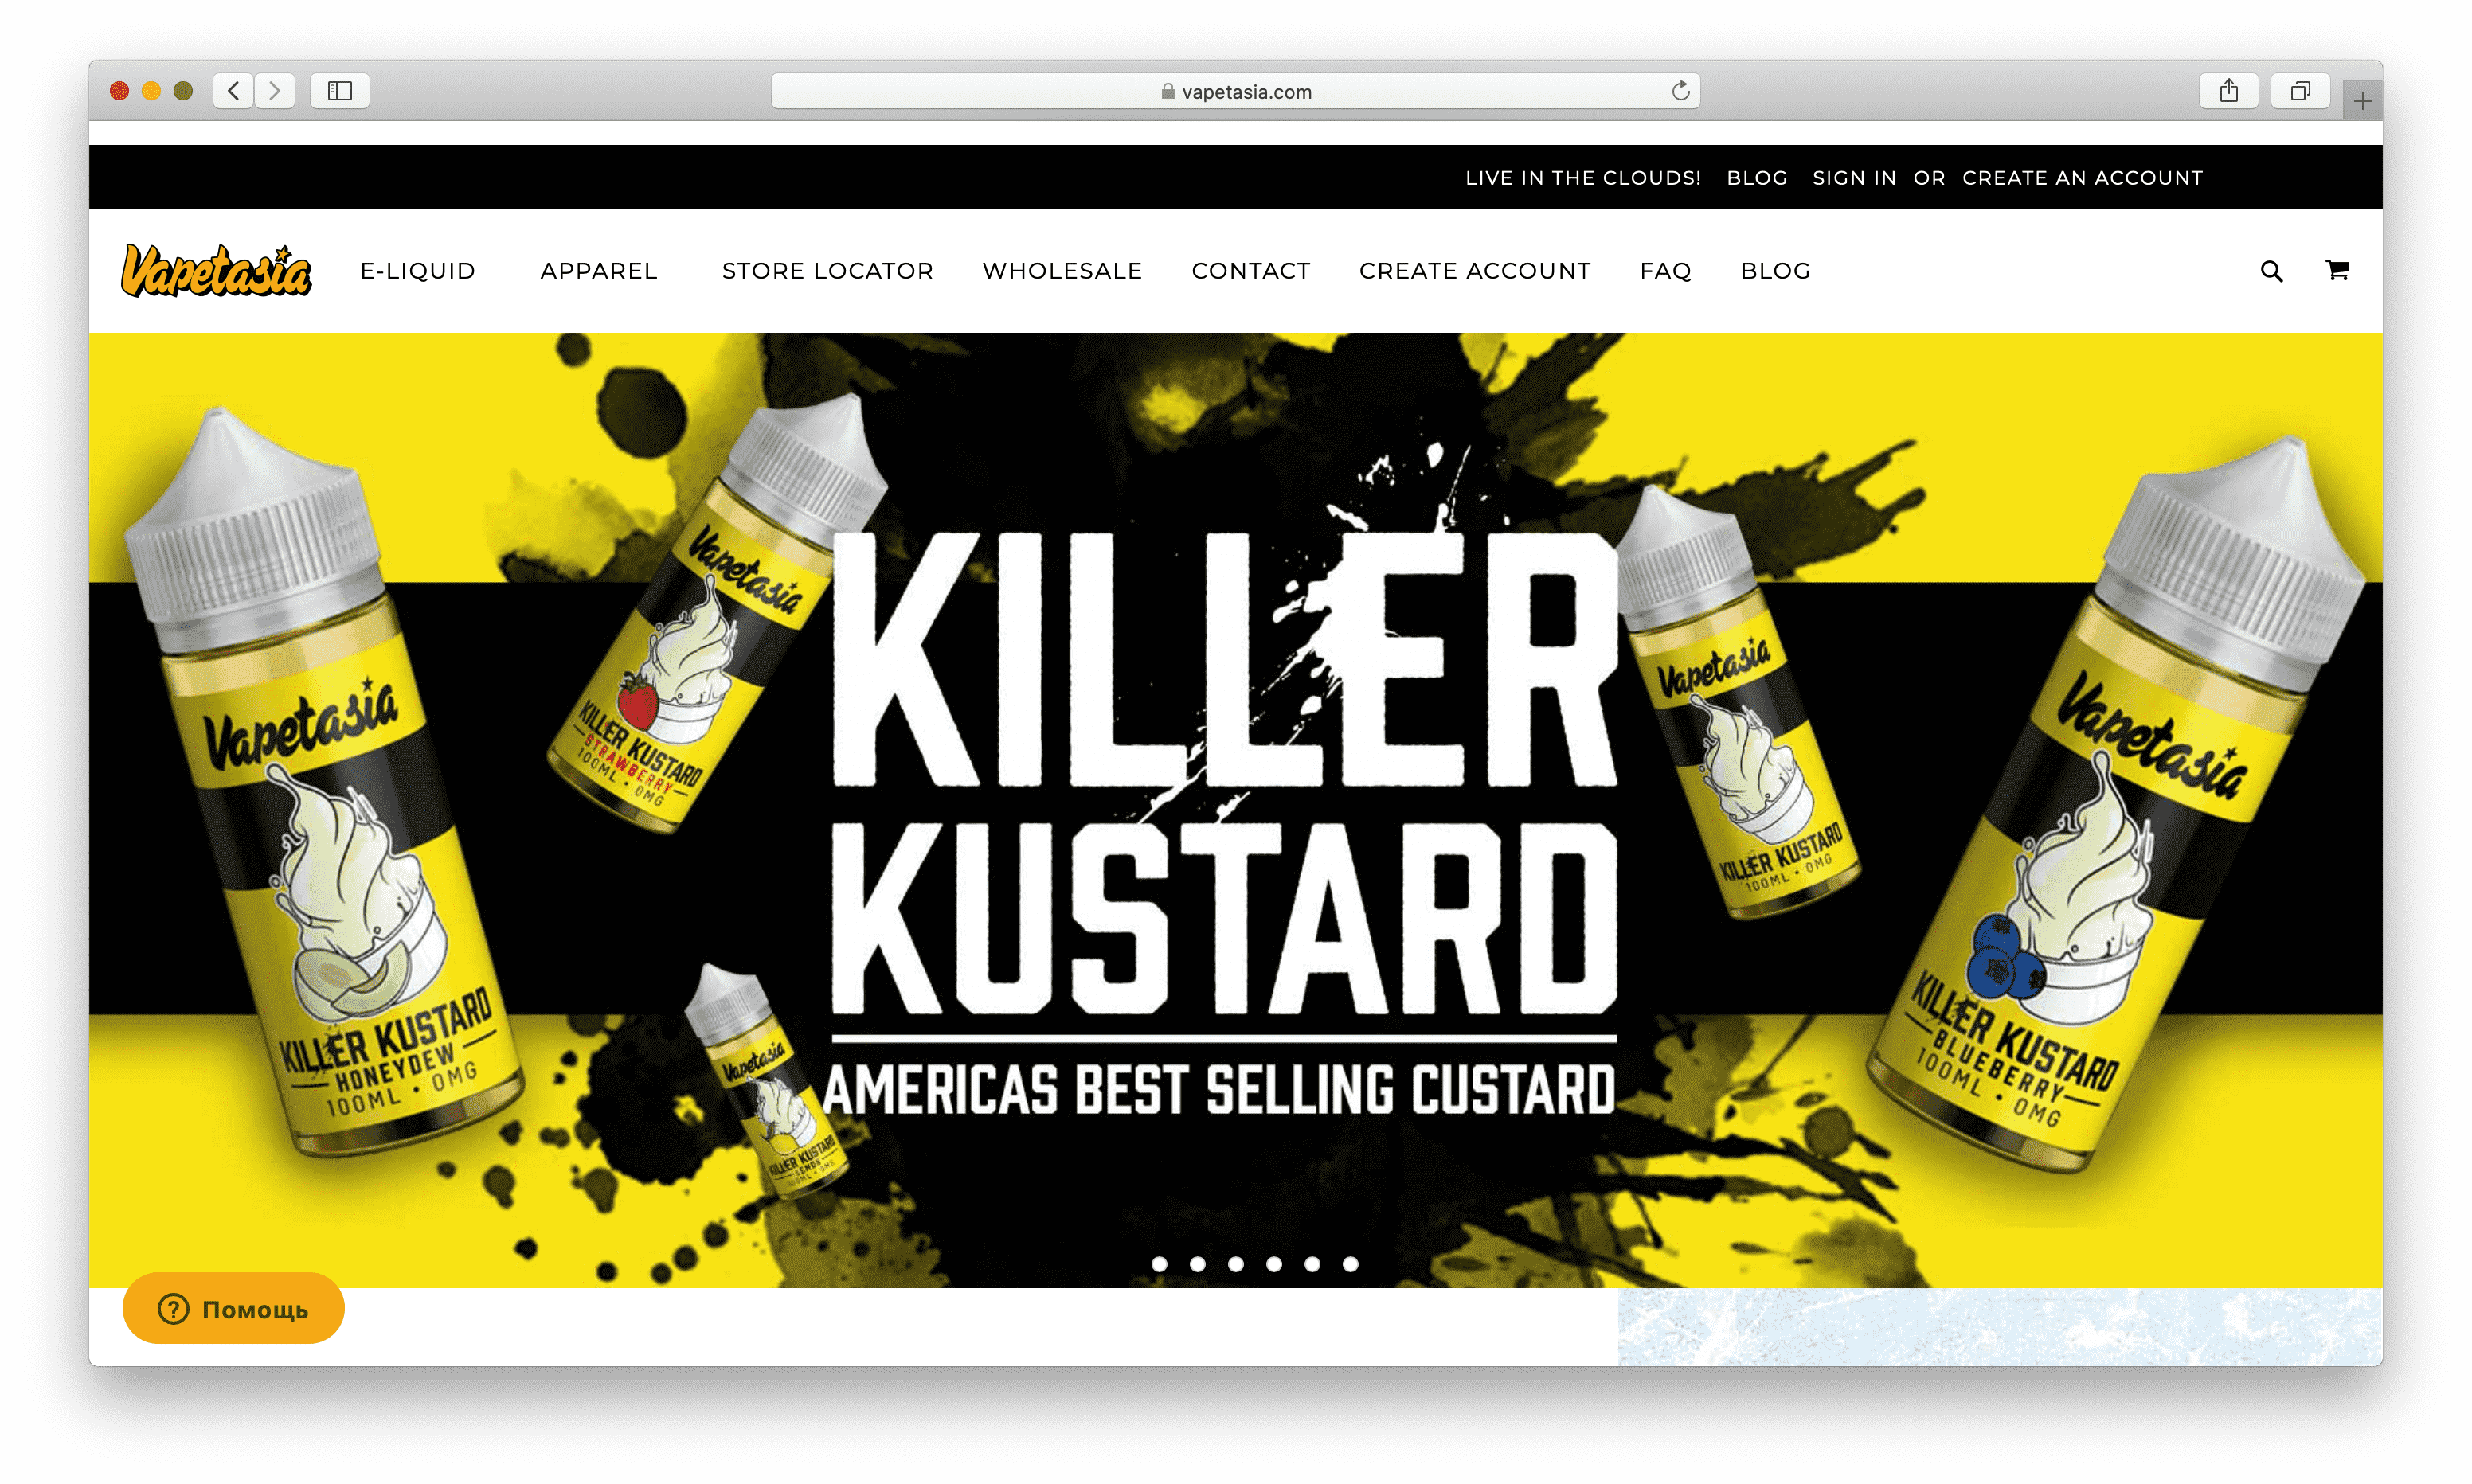 Vapetasia E-Juice: The Top Guide on Their Inventory